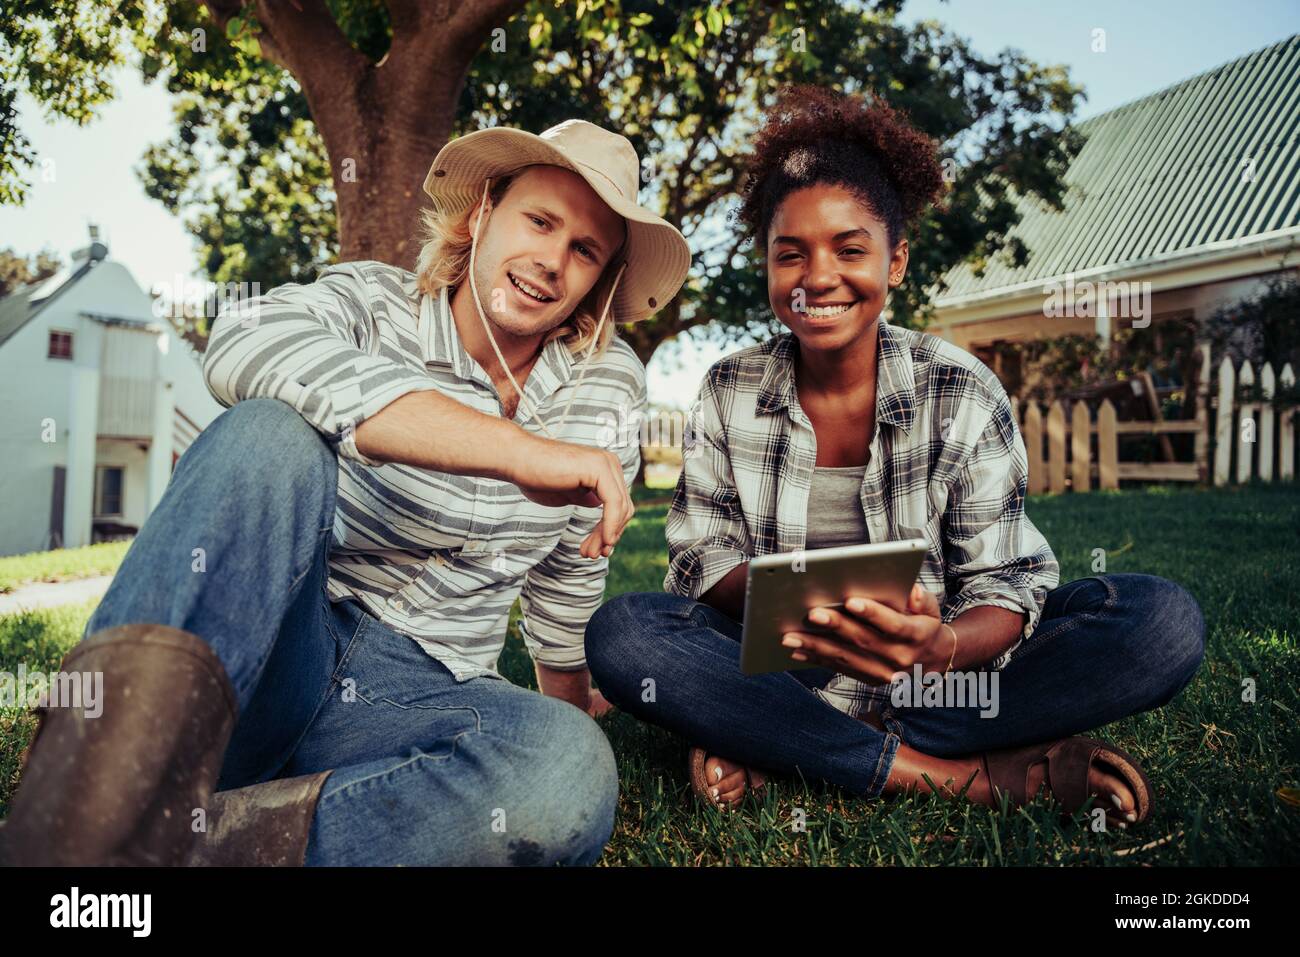 Mixed race couple smiling while enjoying time together sitting on grass scrolling through images on digital device  Stock Photo